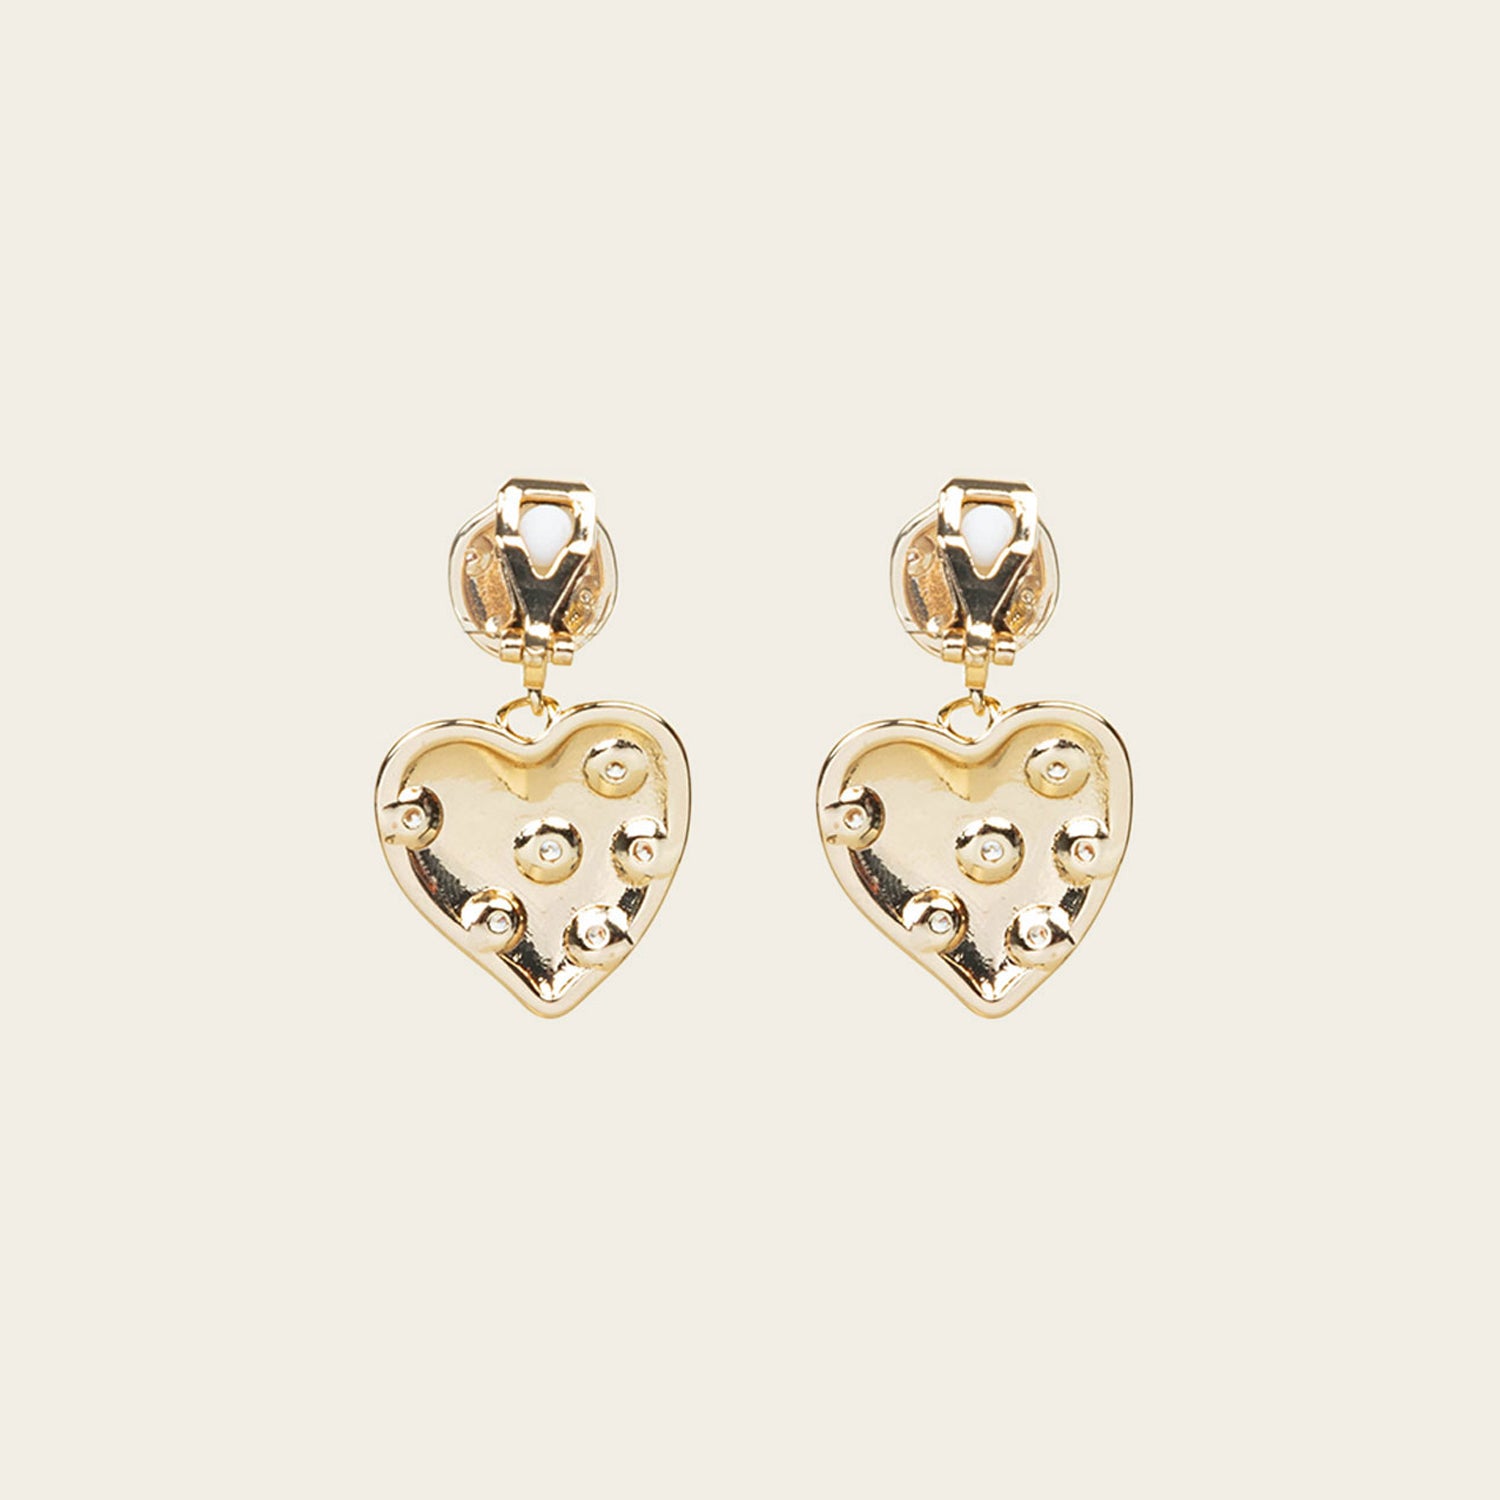 Image of the Amore Clip On Earrings in Gold offer a secure, padded closure type for a comfortable wear of 8-12 hours that is suitable for all ear types. This single pair features stainless steel and cubic zirconia construction and is non-tarnish and water resistant. Note: The clip-on earring has removable rubber padding.